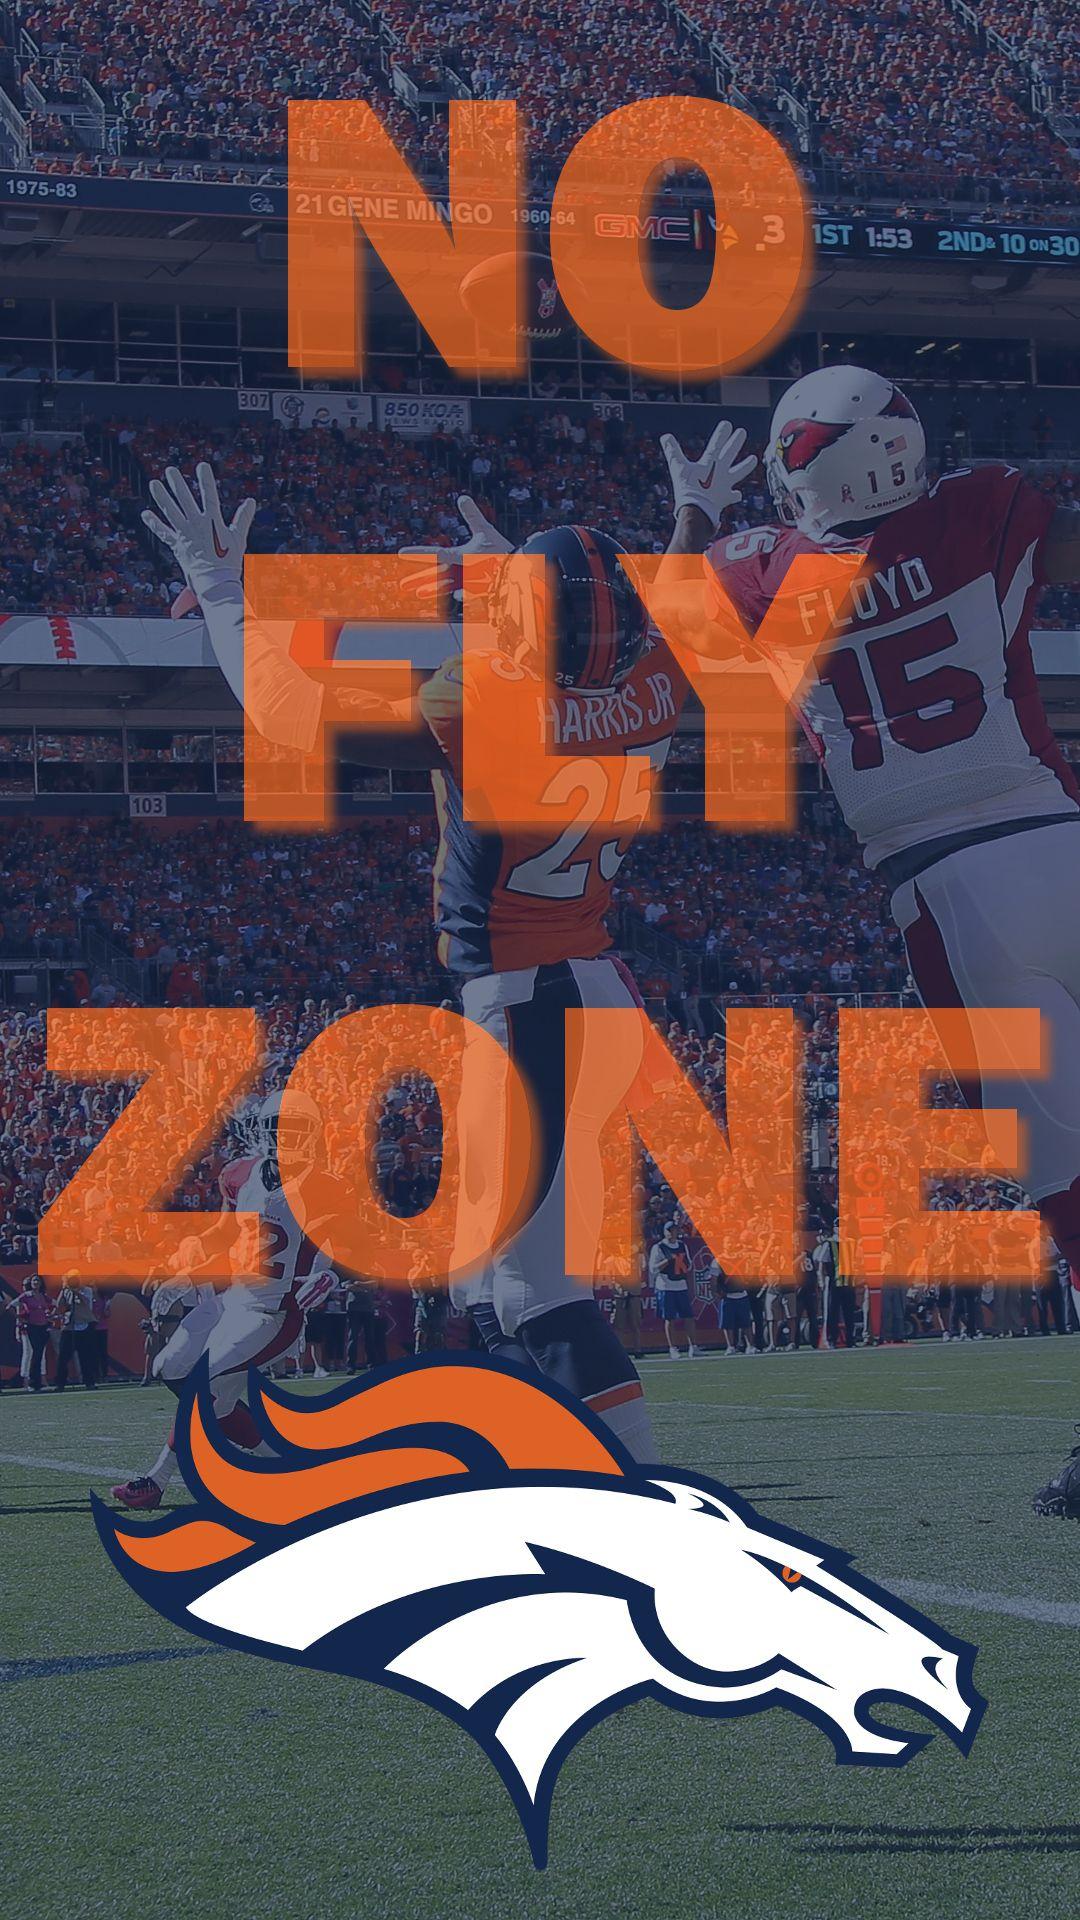 Sick NO FLY ZONE Wallpaper From U Andytkg98